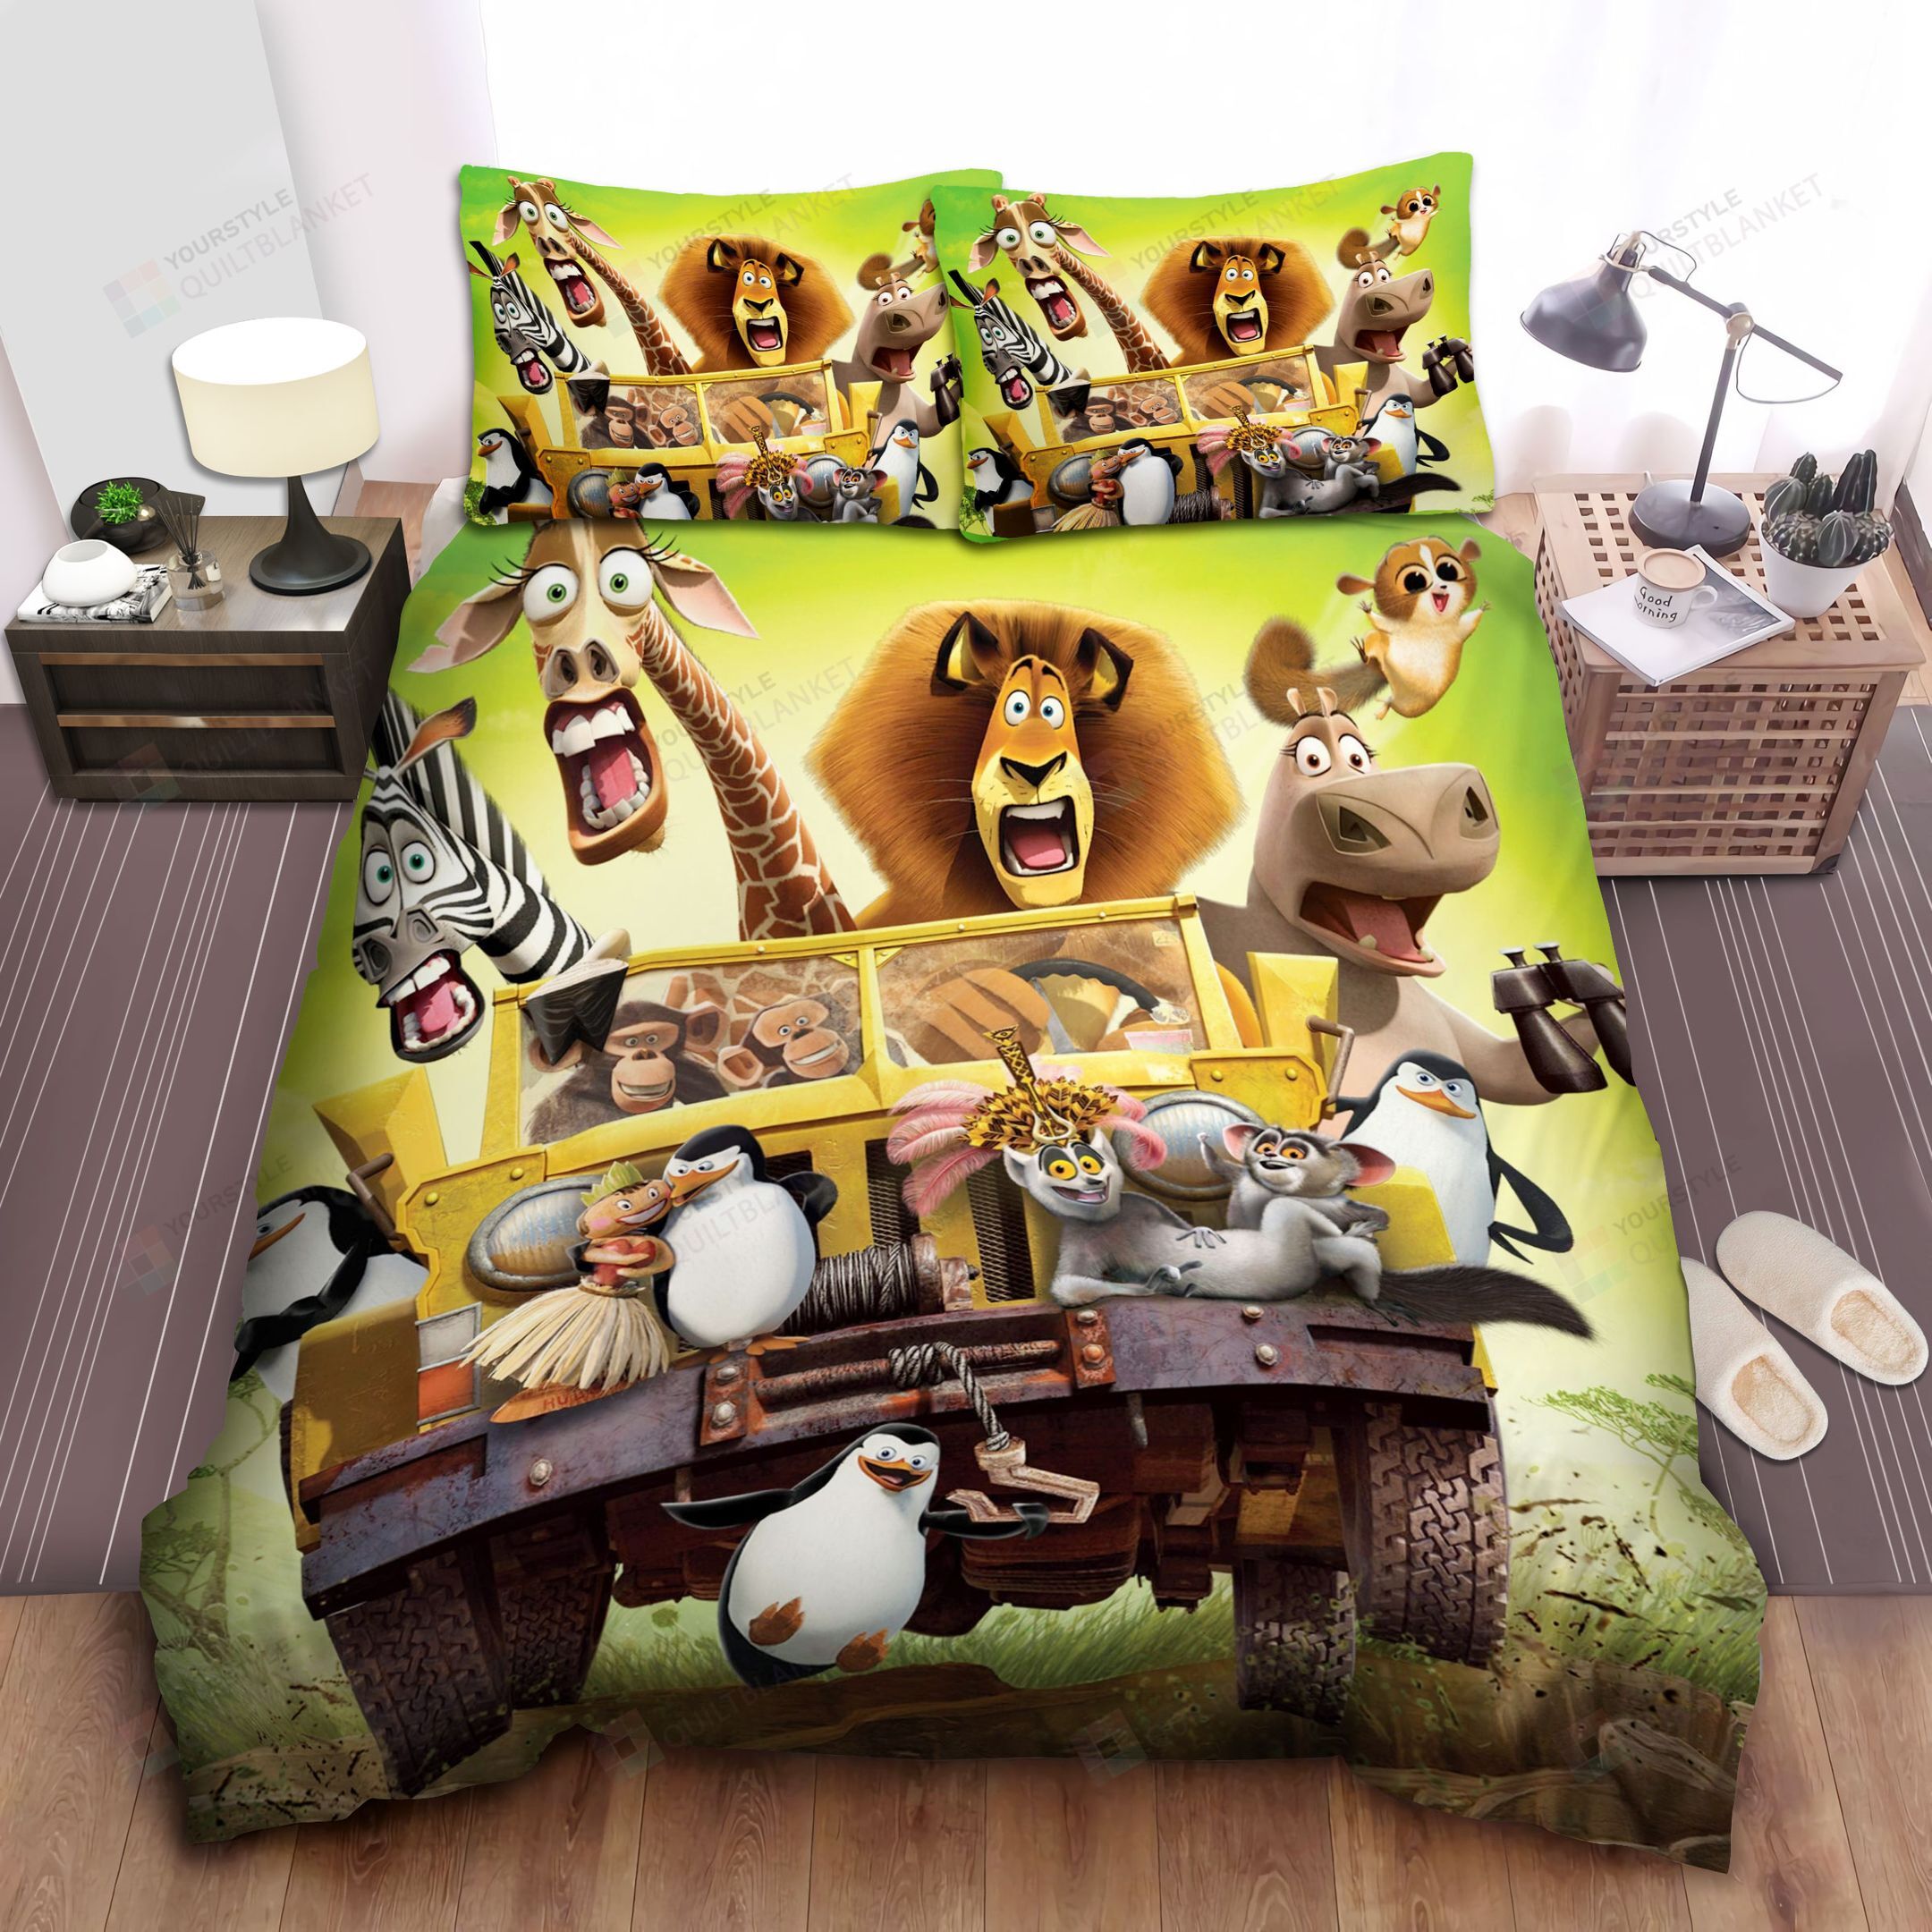 Madagascar 2 Characters In A Jeep Car Bed Sheets Spread Comforter Duvet Cover Bedding Sets